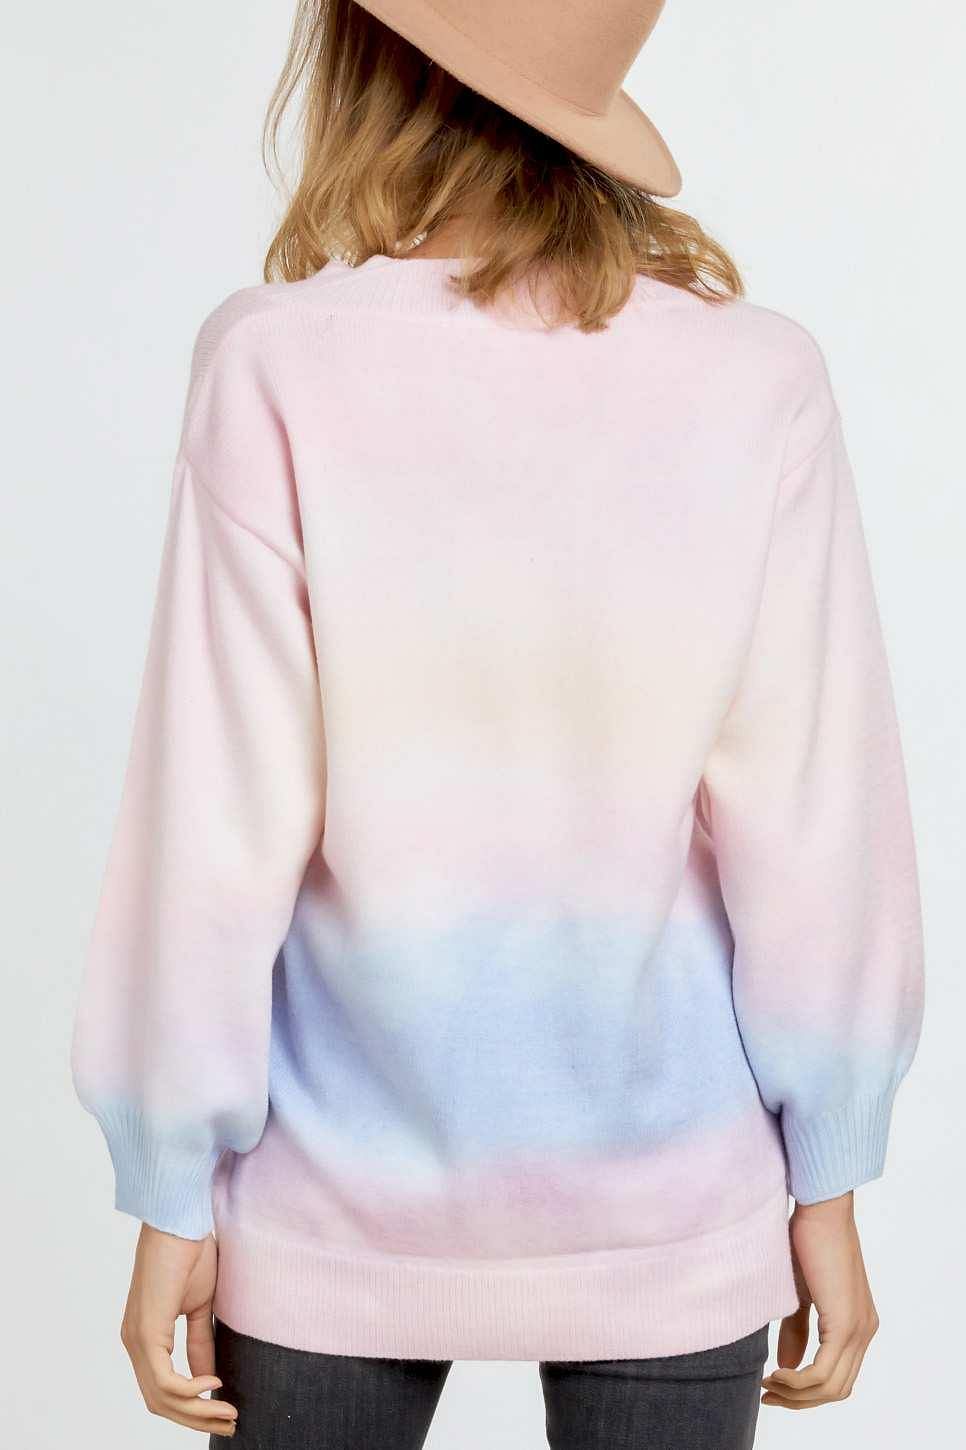 Long Sleeve Tie Dye V-Neck Sweater - Shopping Therapy, LLC 